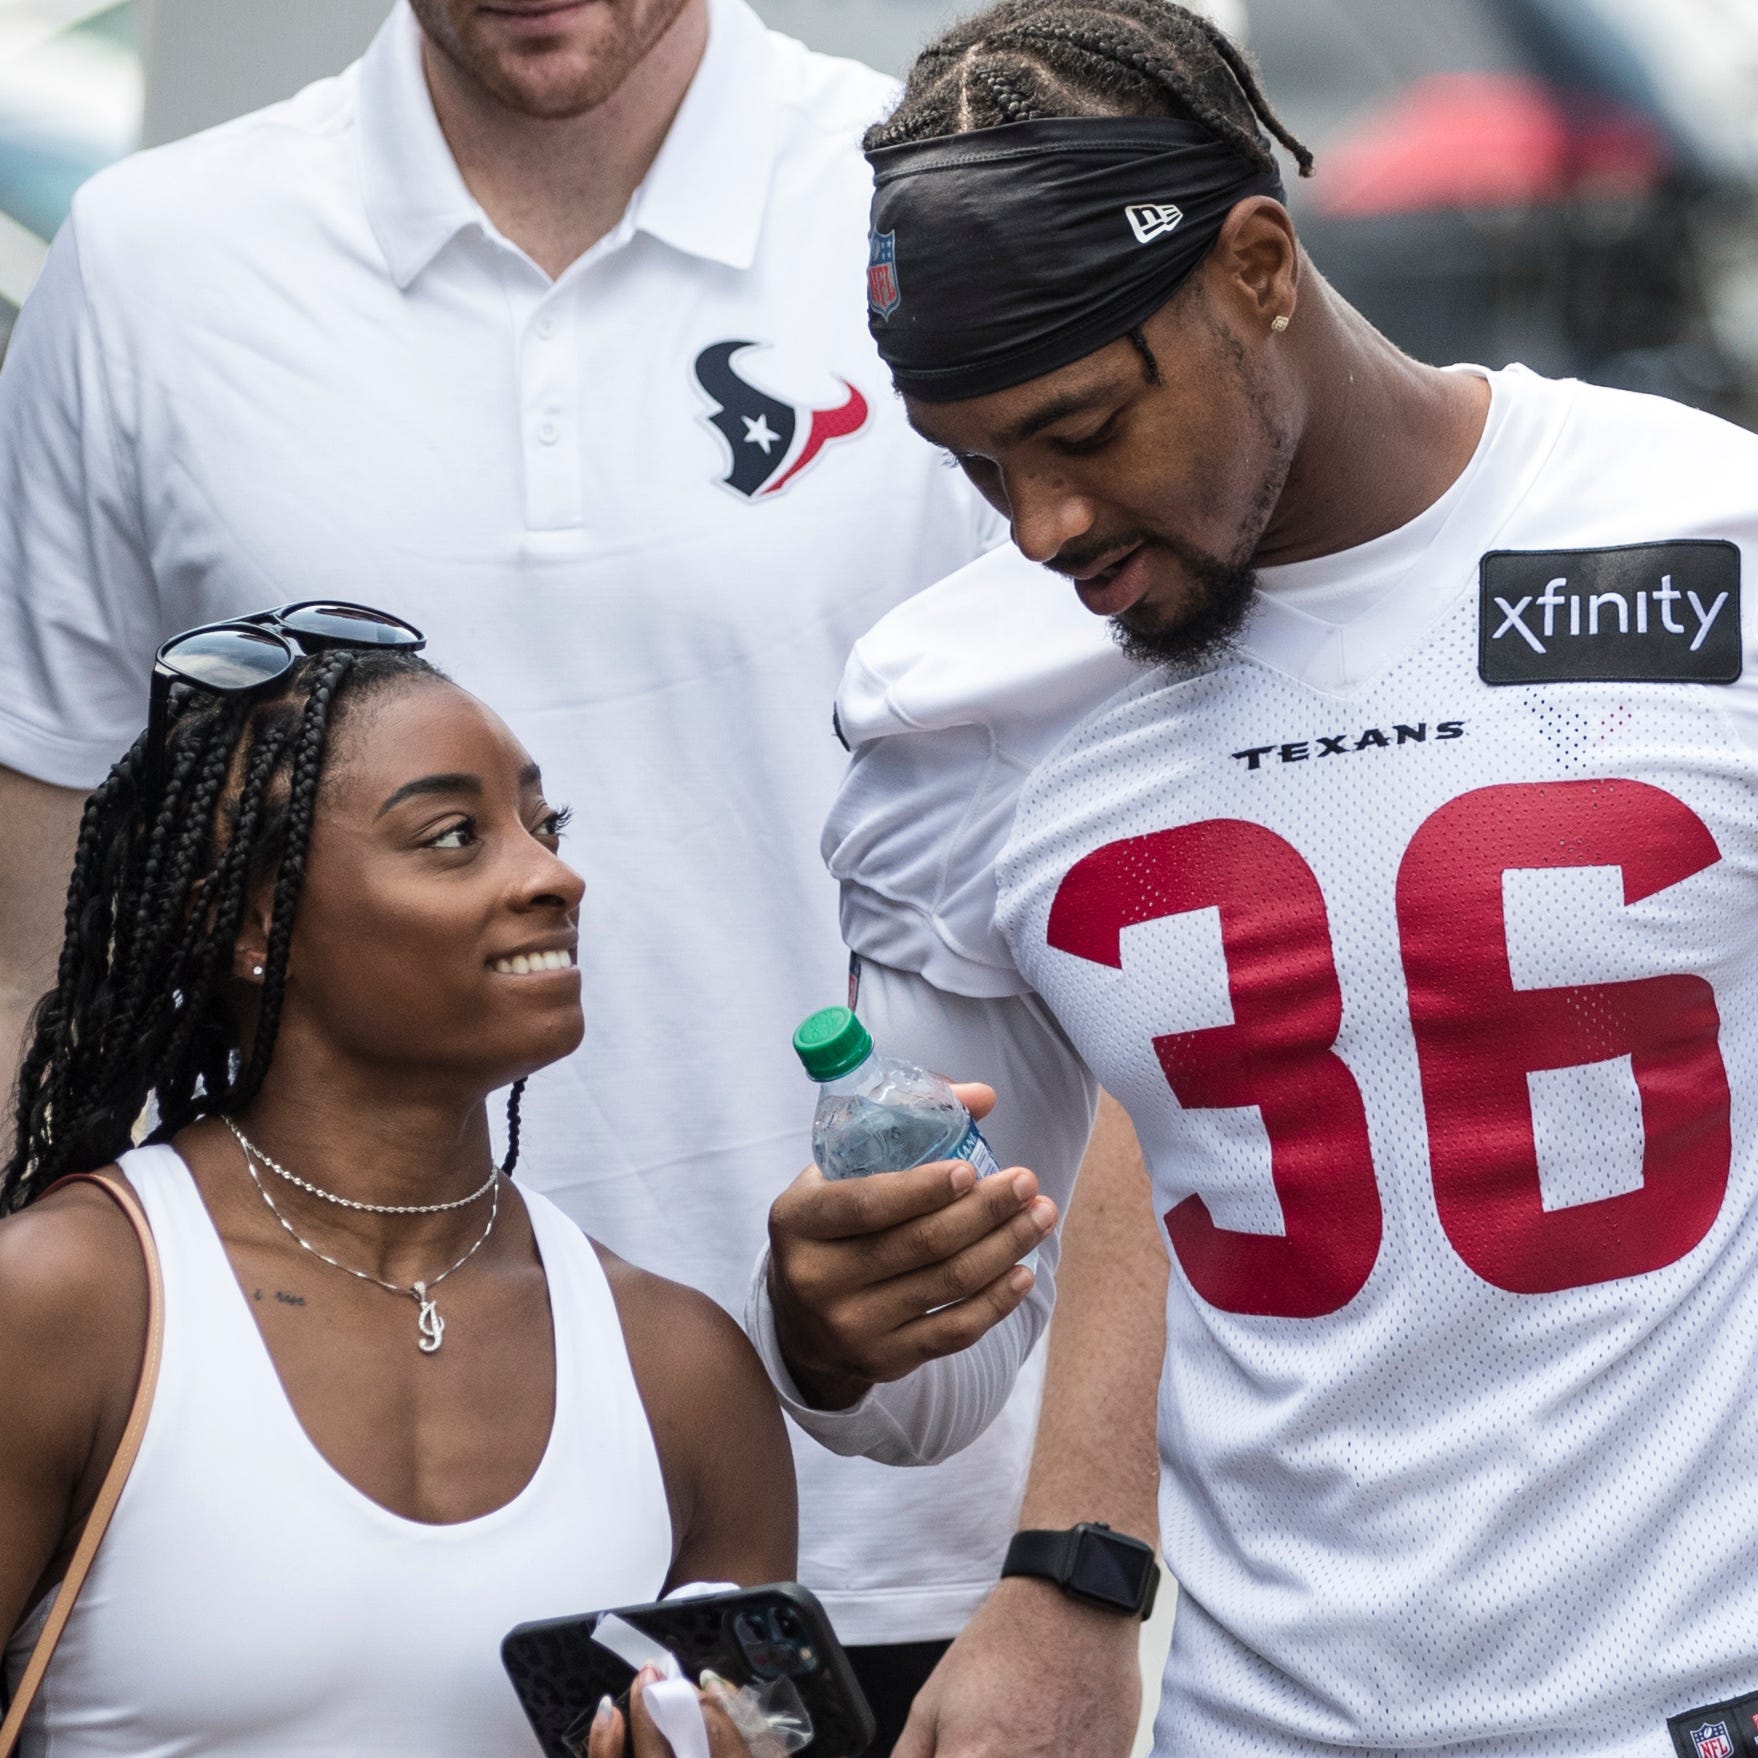 Olympic gymnast Simone Biles and defensive back Jonathan Owens first started dating while he was playing for the Houston Texans.